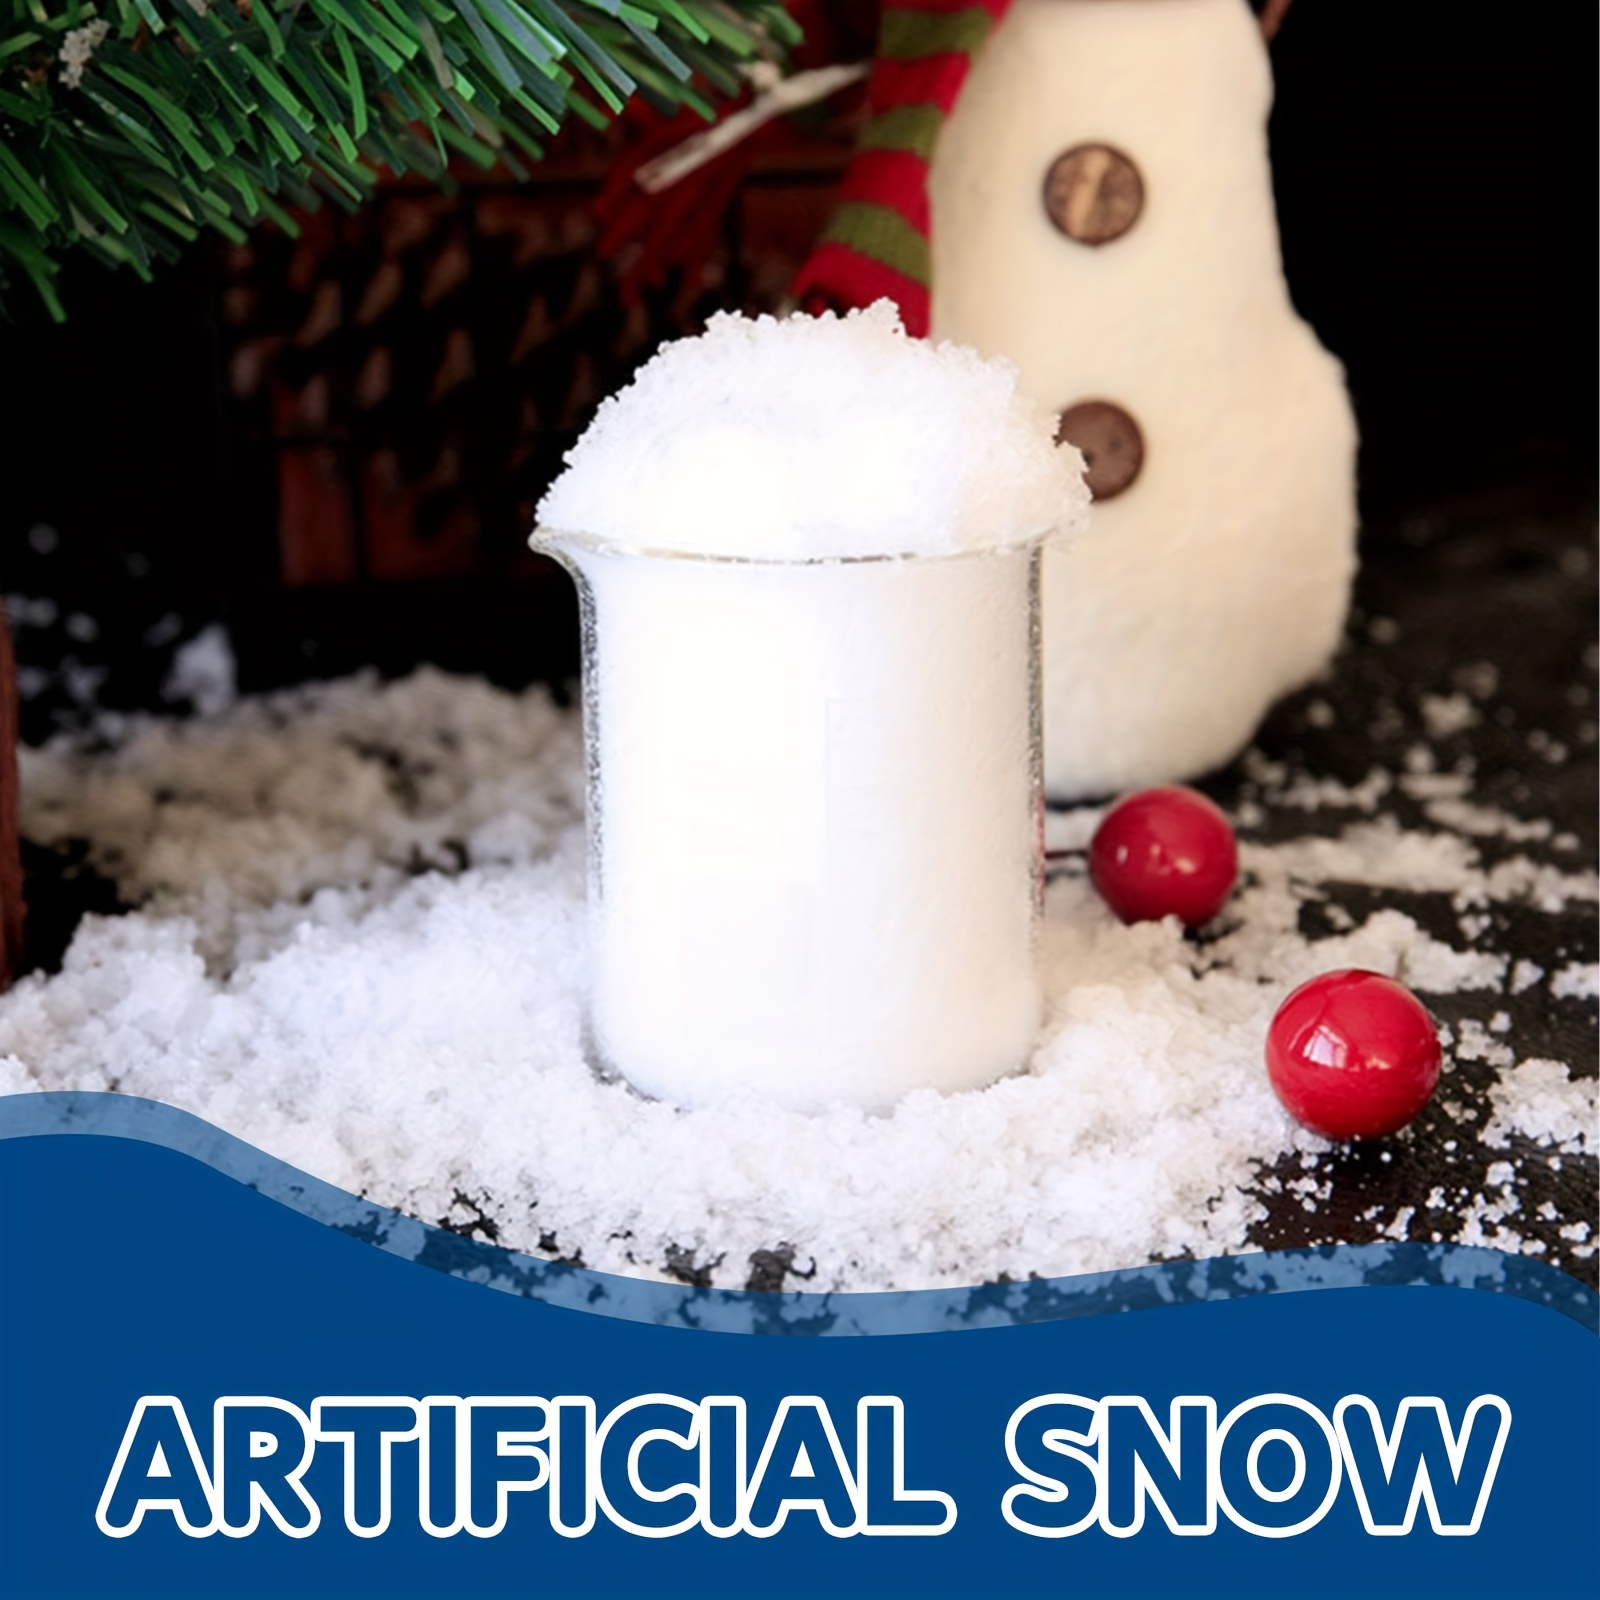 Artificial snow for Christmas  From fake powder snow to snow